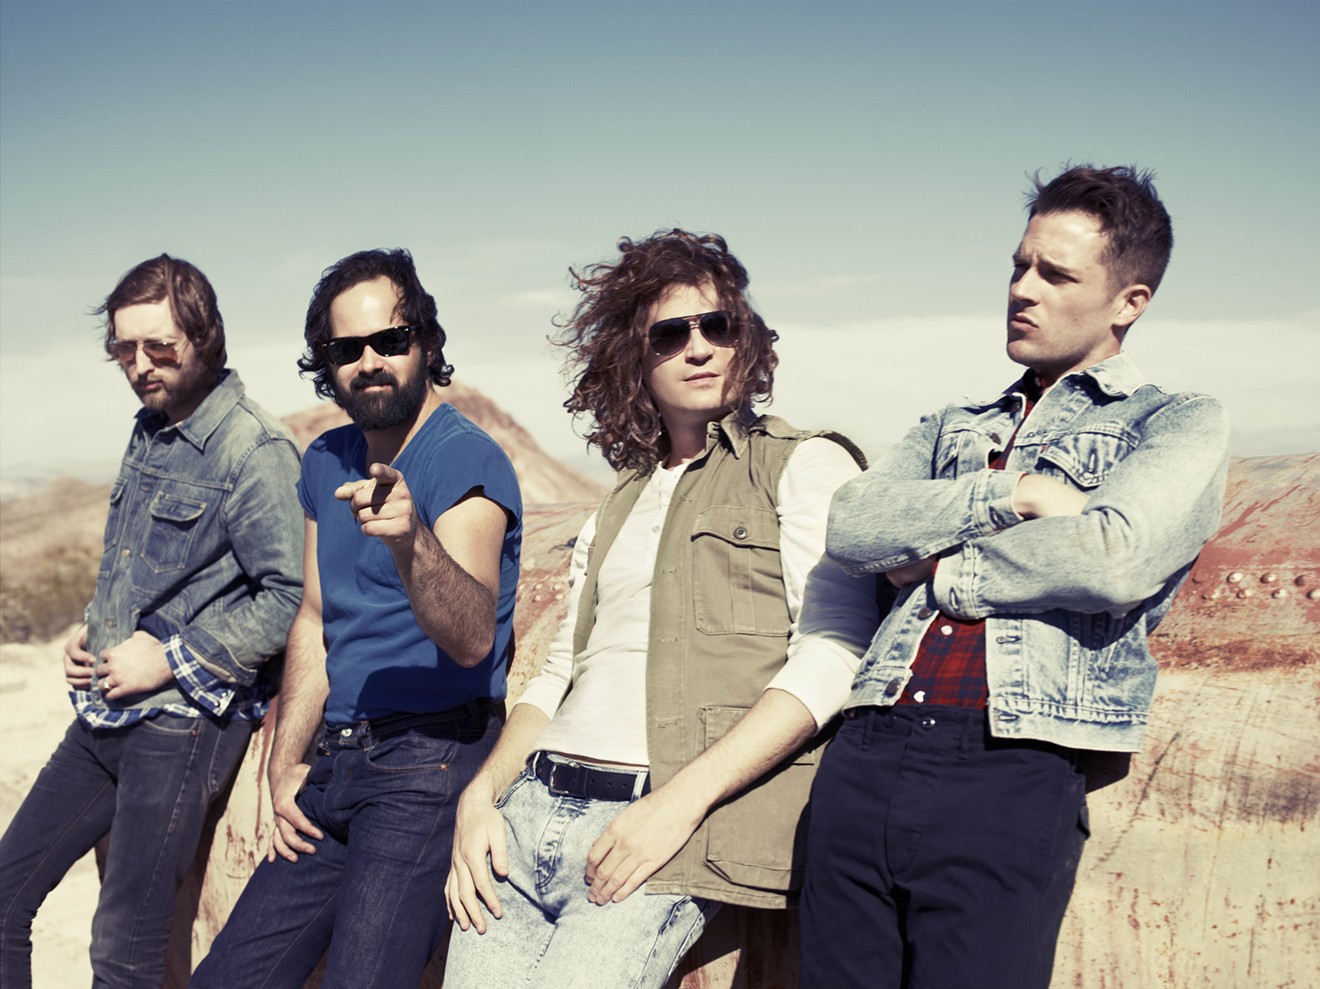 The Killers have announced a show at Toyota Music Factory in just six weeks. Better act fast.